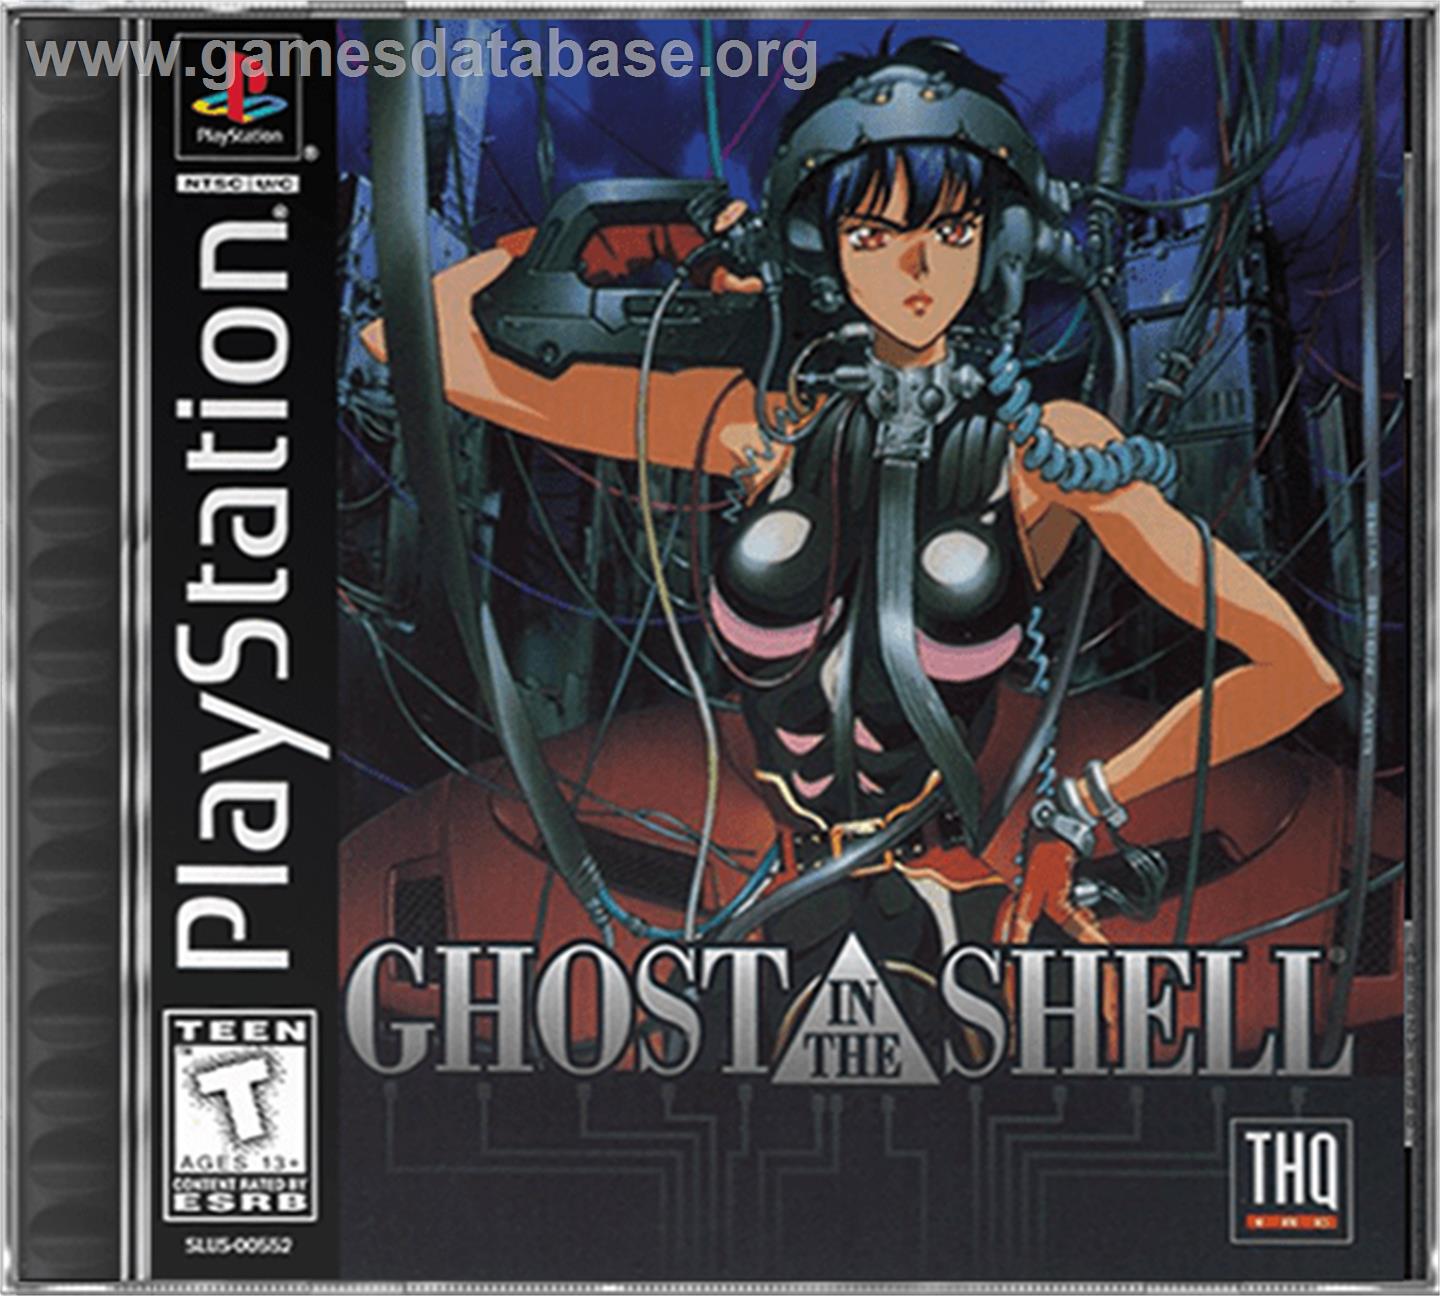 Ghost in the Shell - Sony Playstation - Artwork - Box